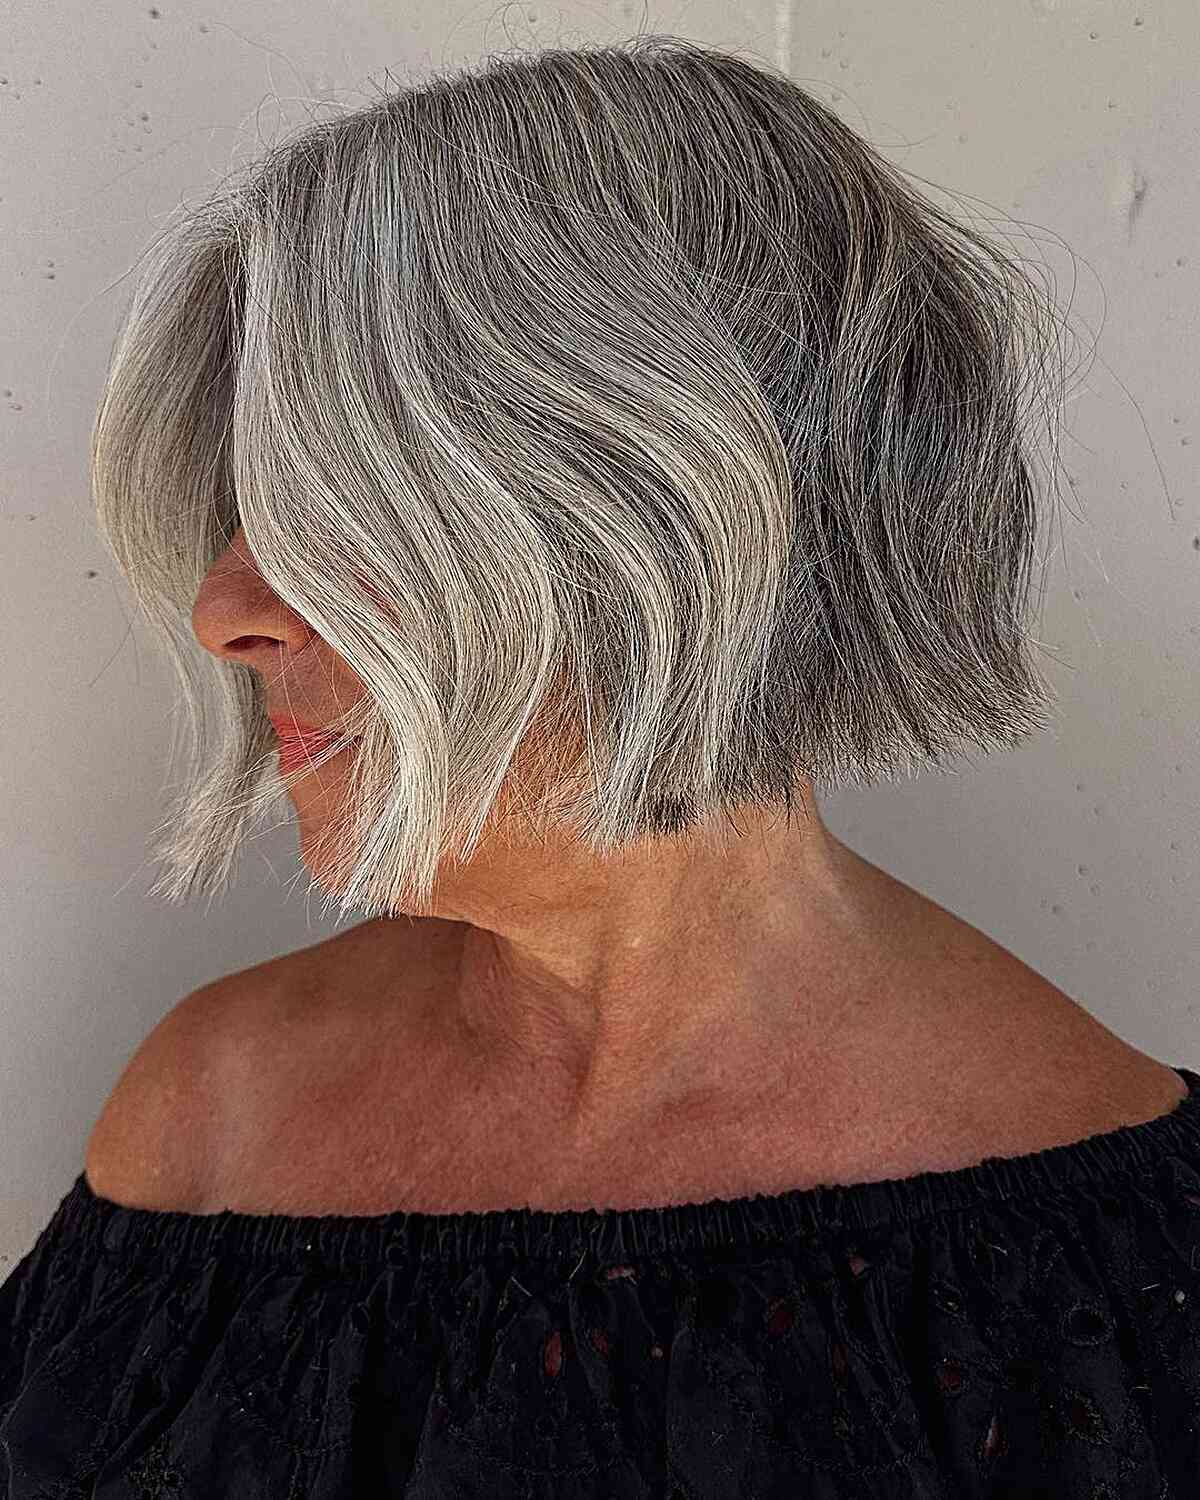 Salt-and-Pepper Micro Bob for Older Women with Grey Hair